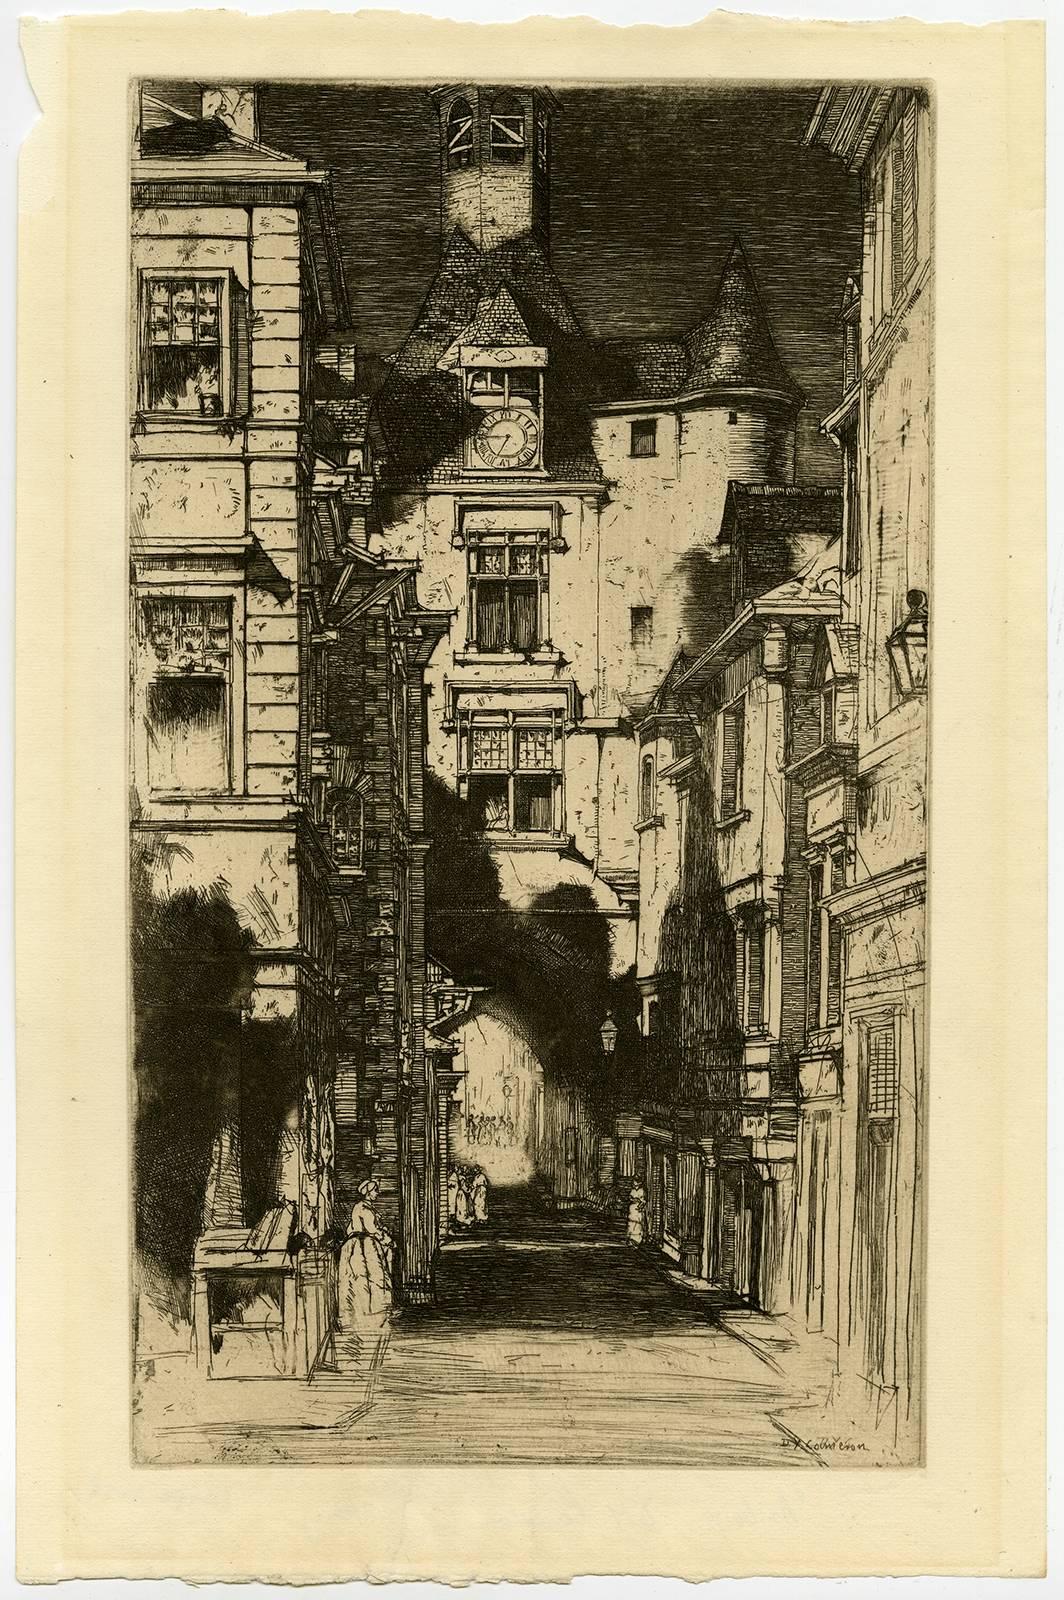 Sir David Young Cameron, R.A. Landscape Print - Untitled - Streetscene in Amboise, France.